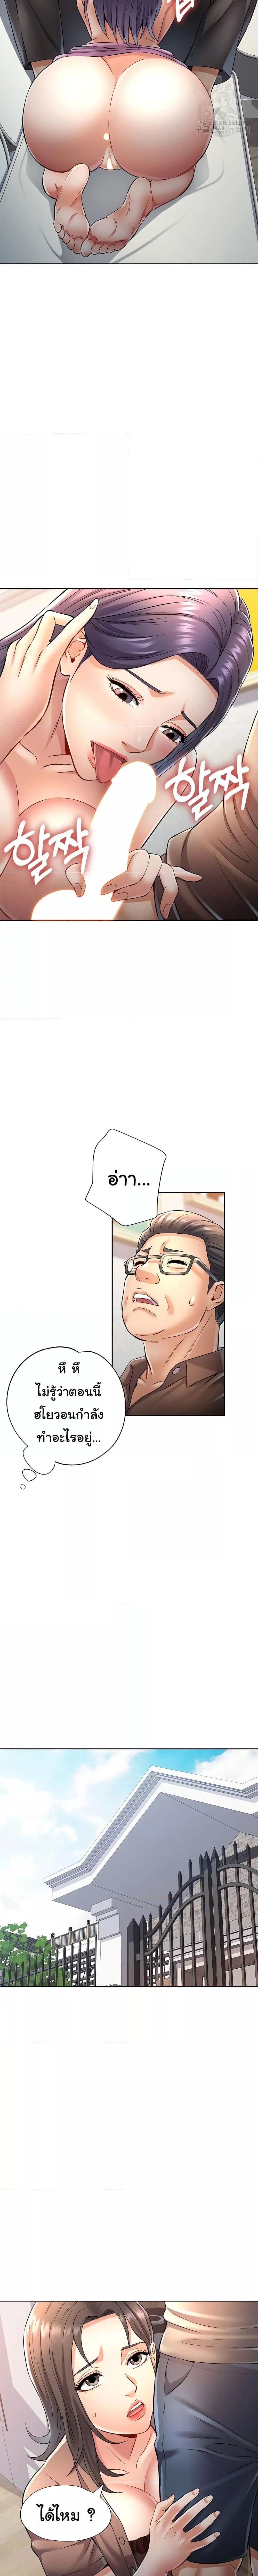 In Her Place ตอนที่ 7 ภาพ 5